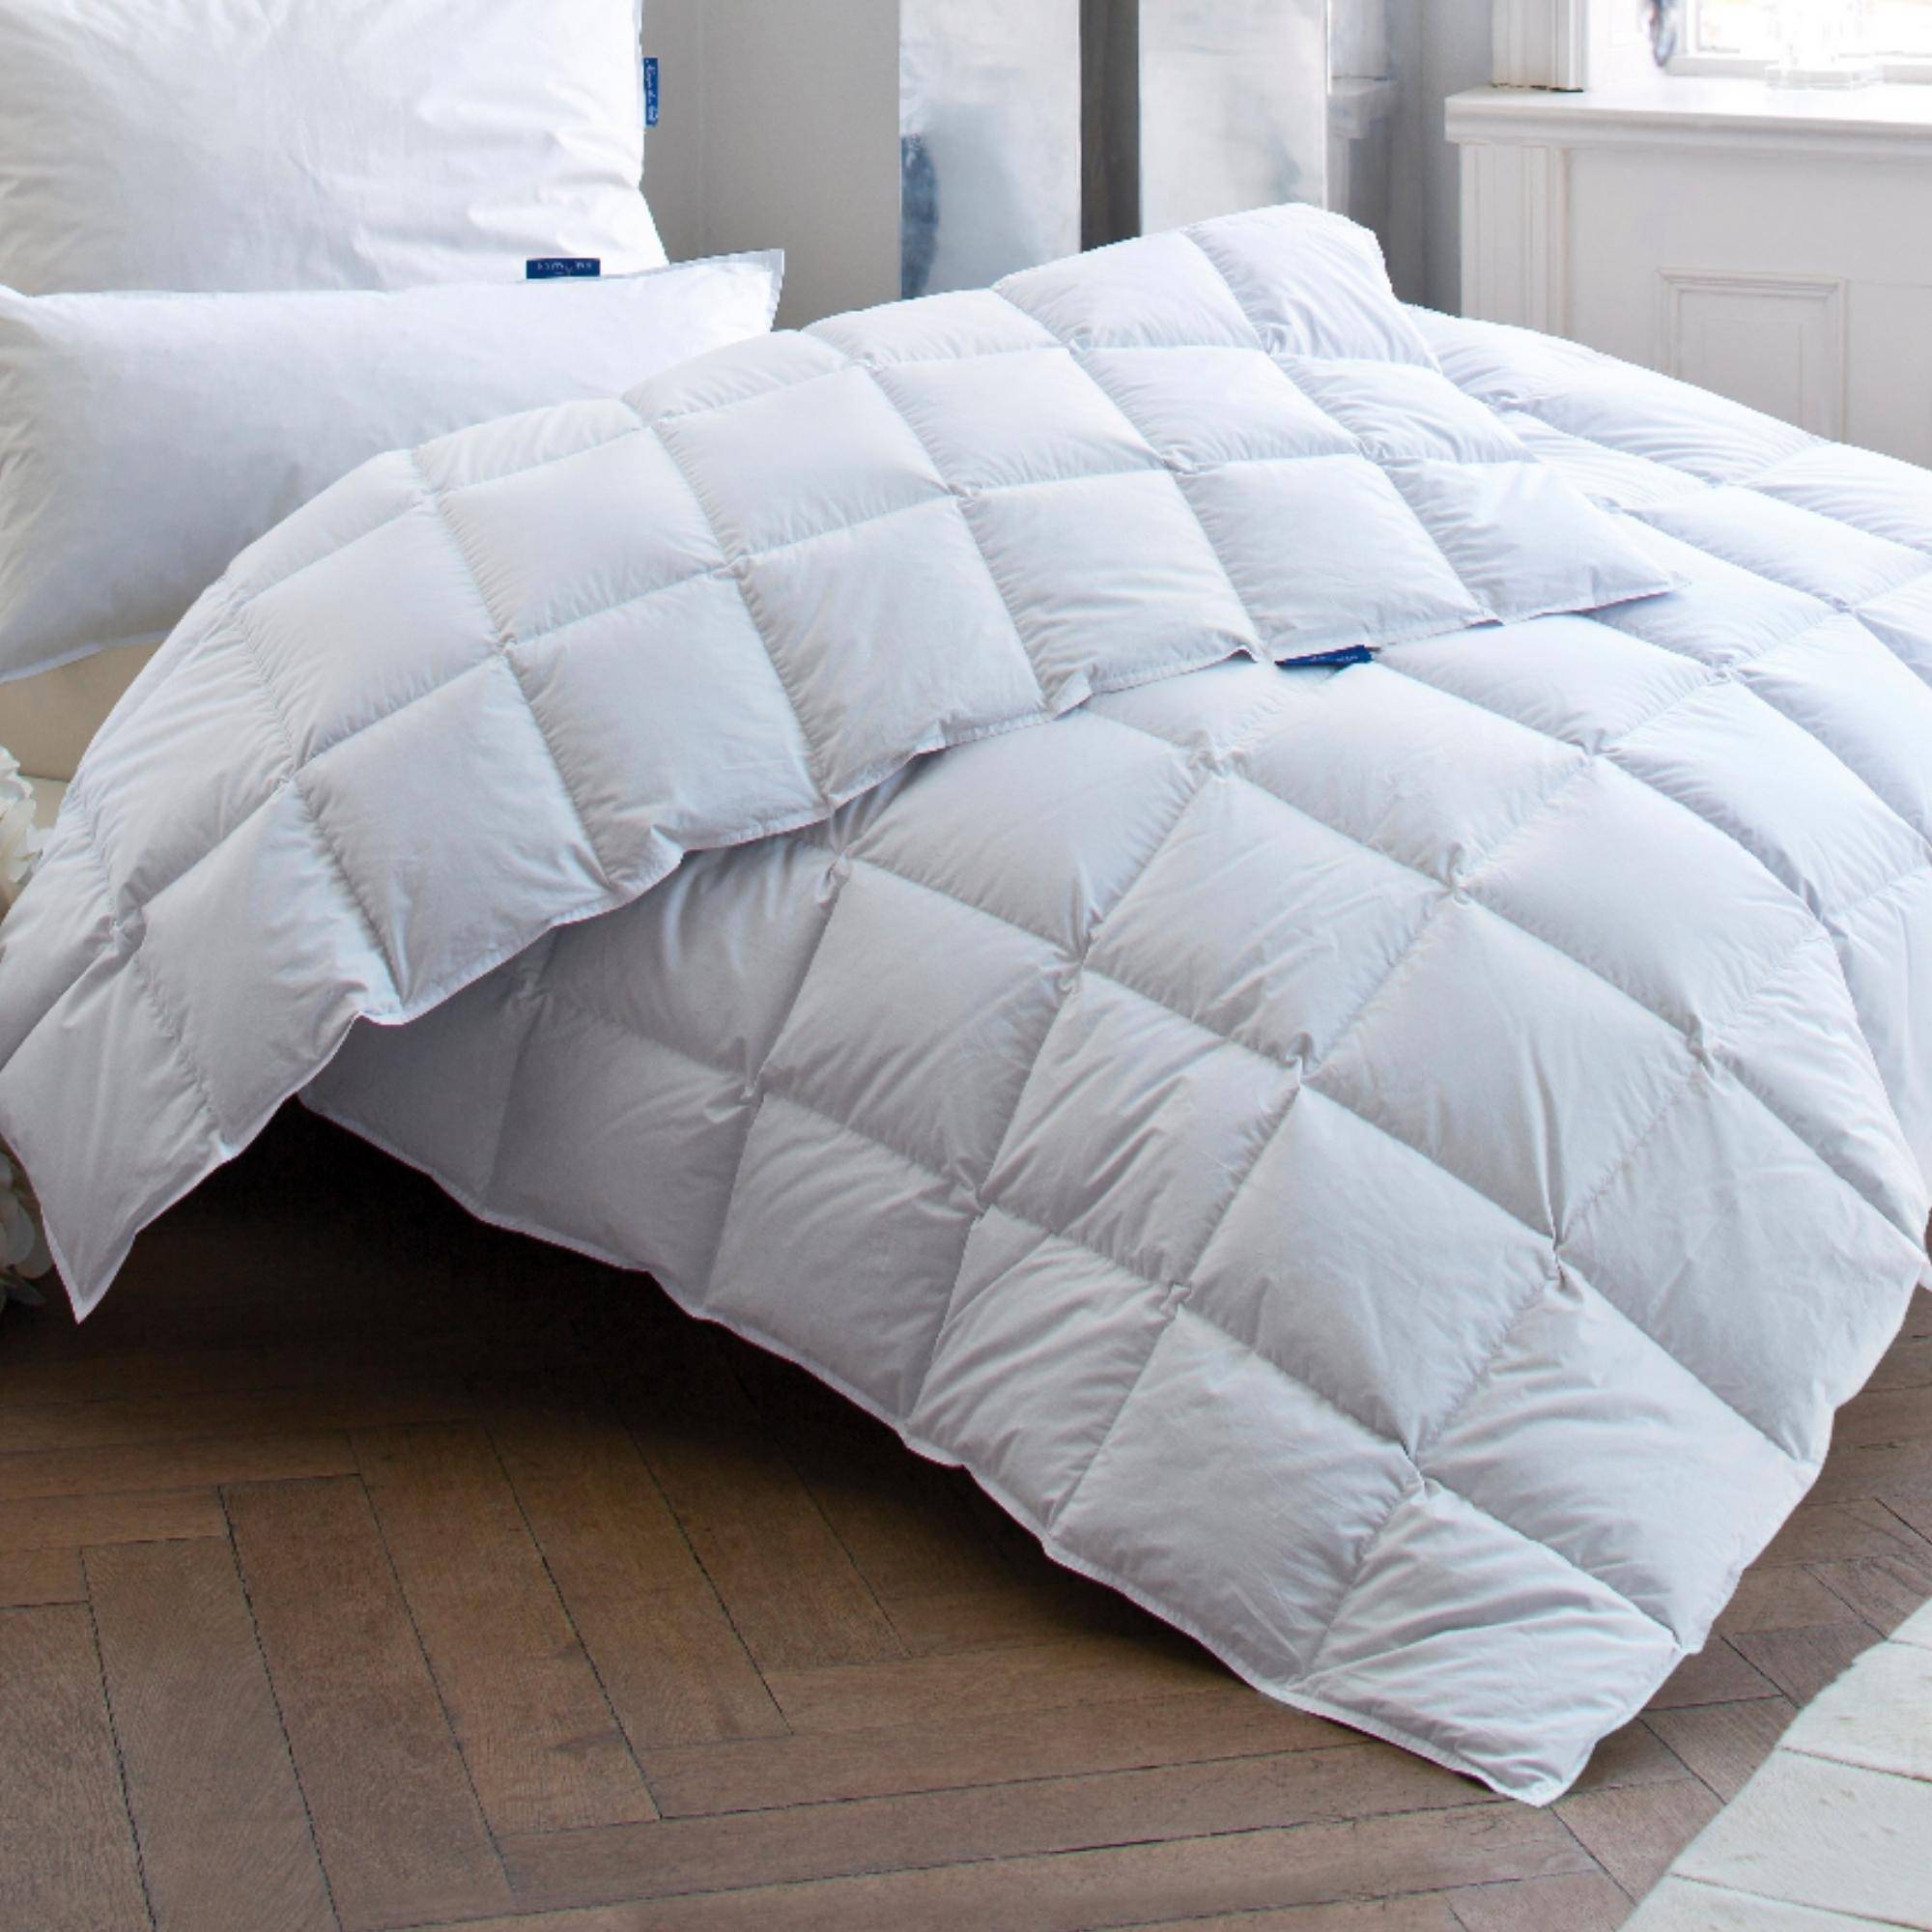 Queen of the Night Duvet - THAT COOL LIVING